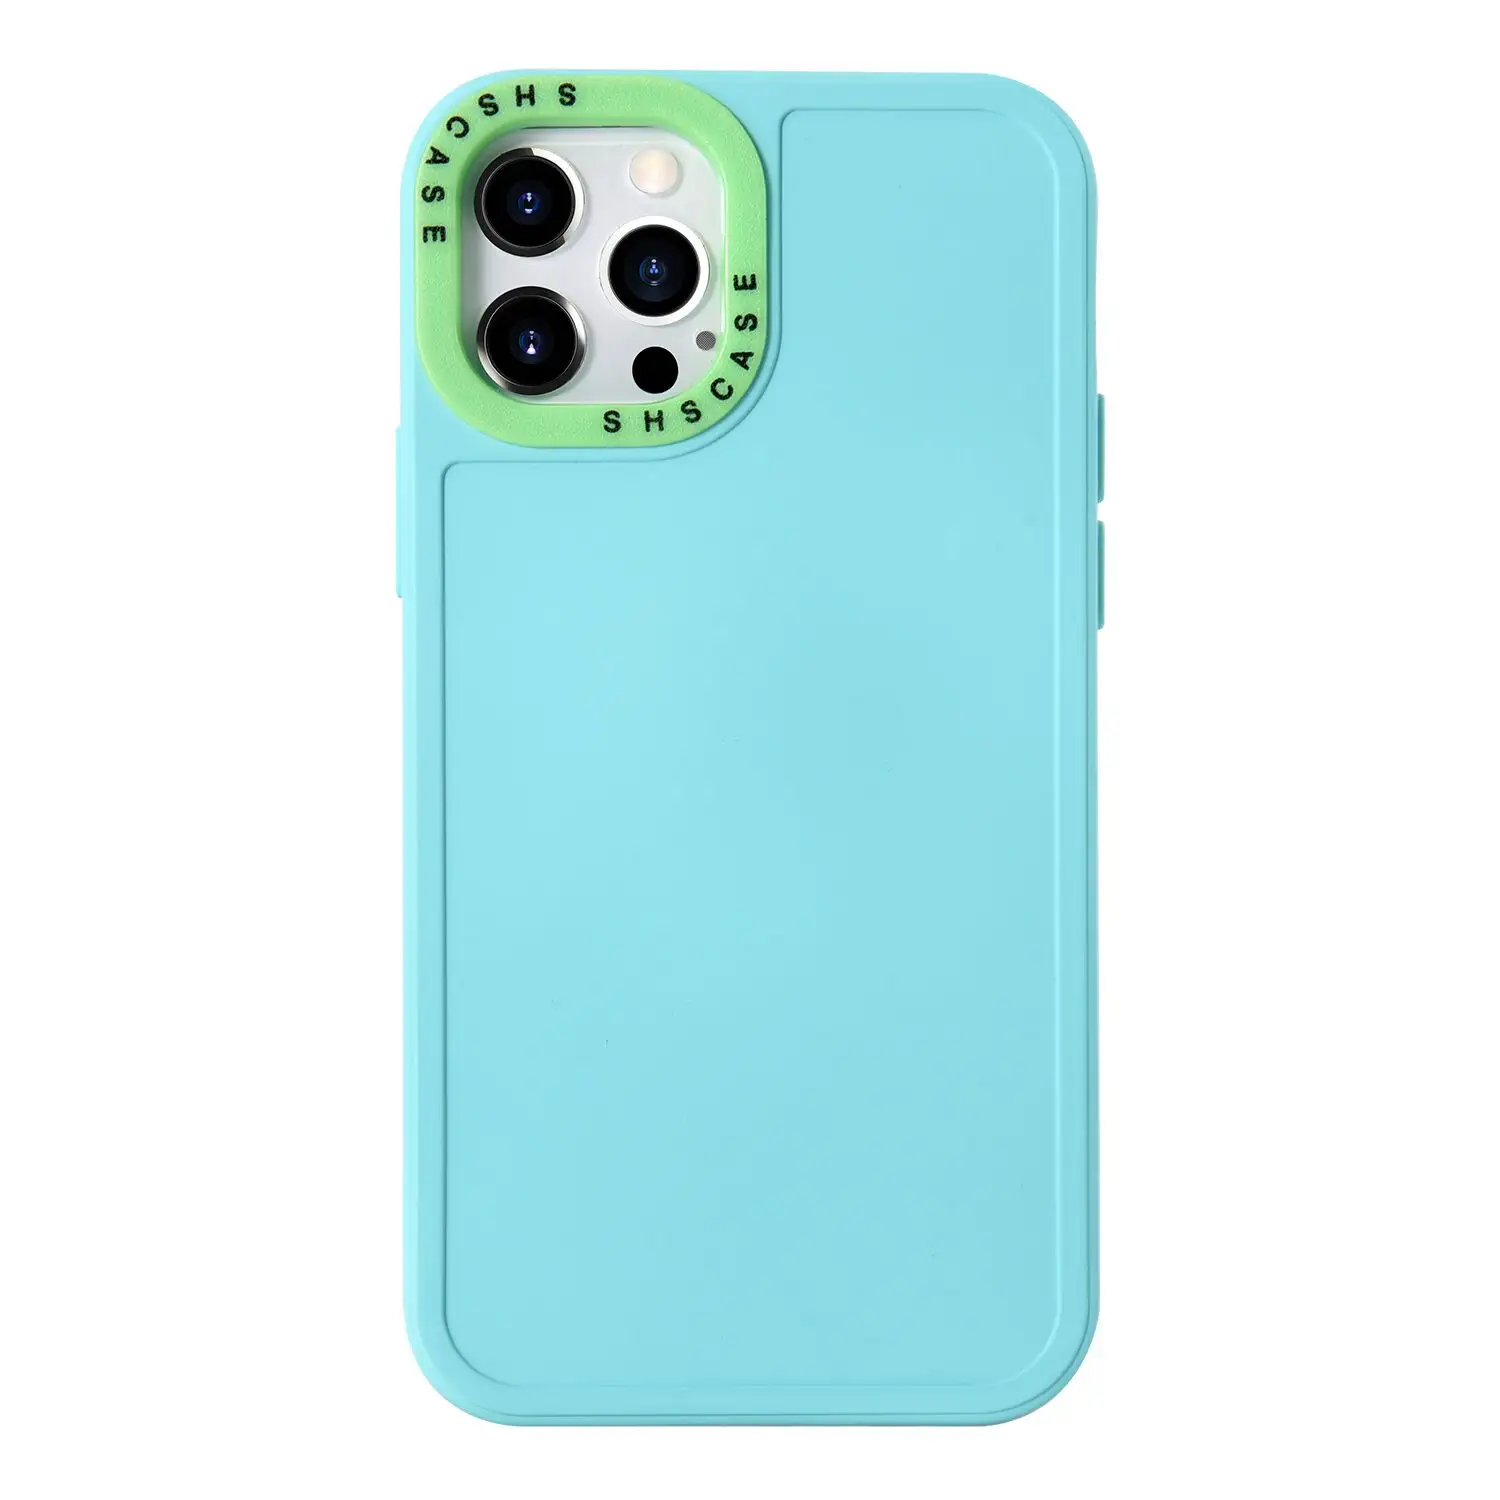 Camera Lens Protection Bumper Phone Case For iPhone 13 Pro Max XR XS MAX SE 12 11 X 8 6 6S 7 Plus Soft Silicone Back Cover